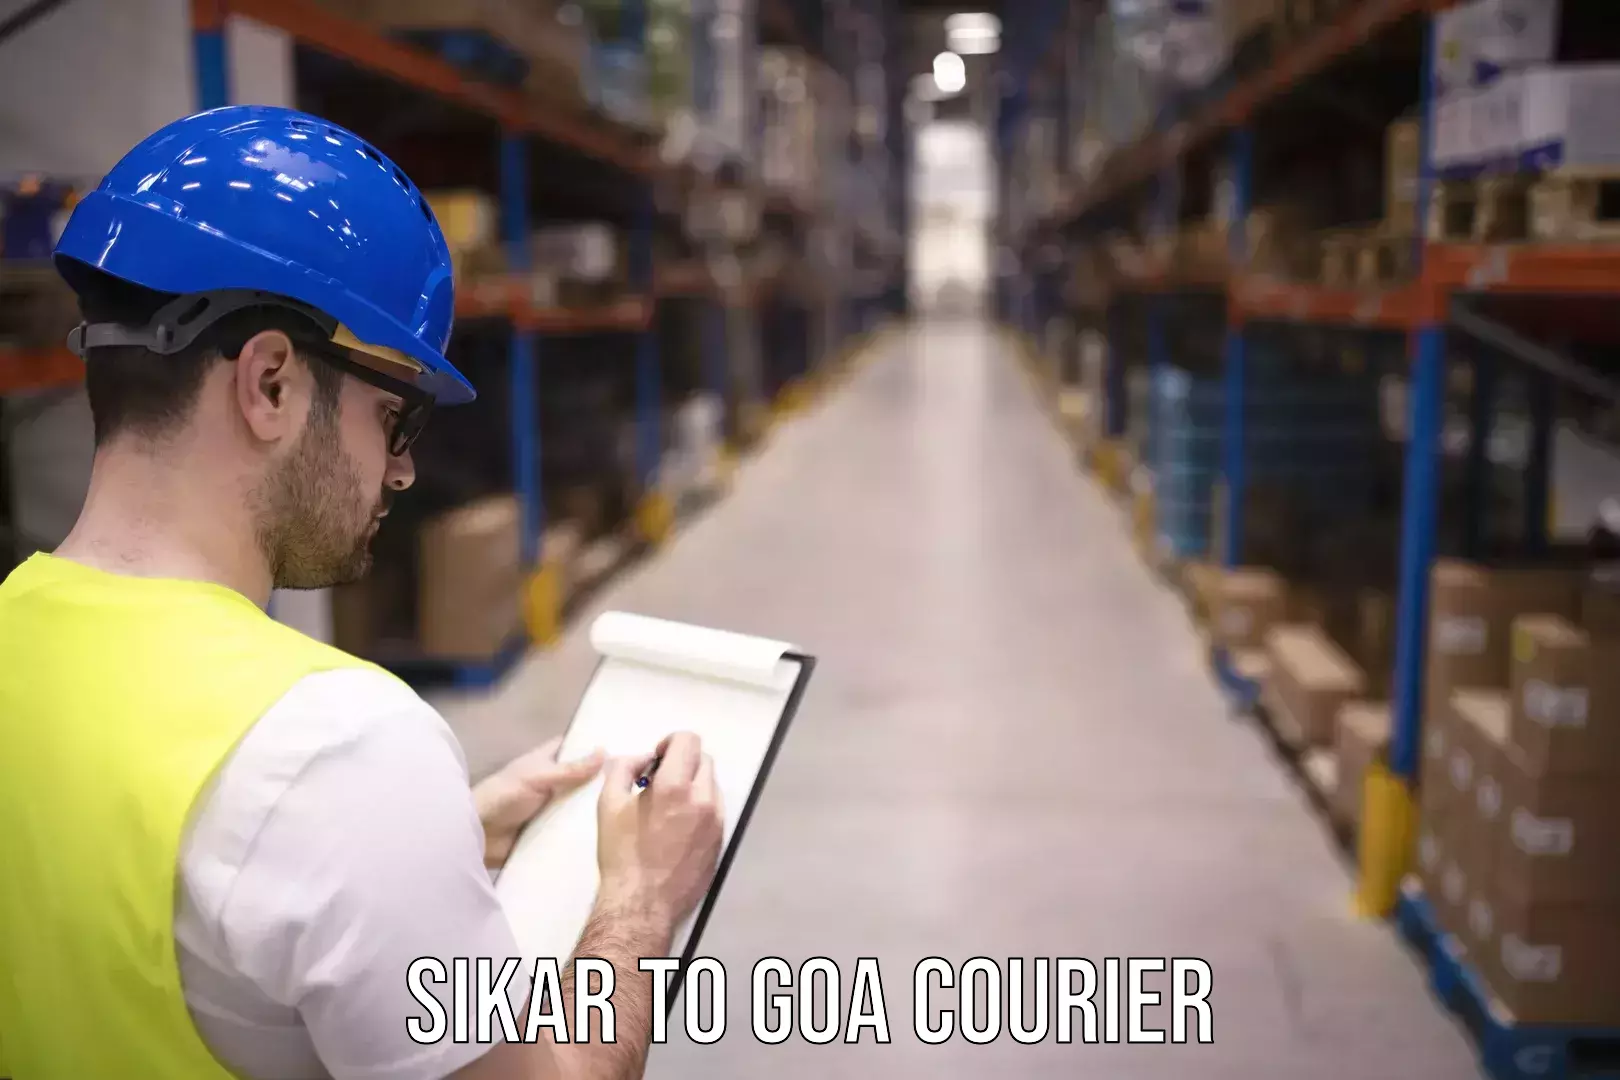 Courier service partnerships Sikar to Goa